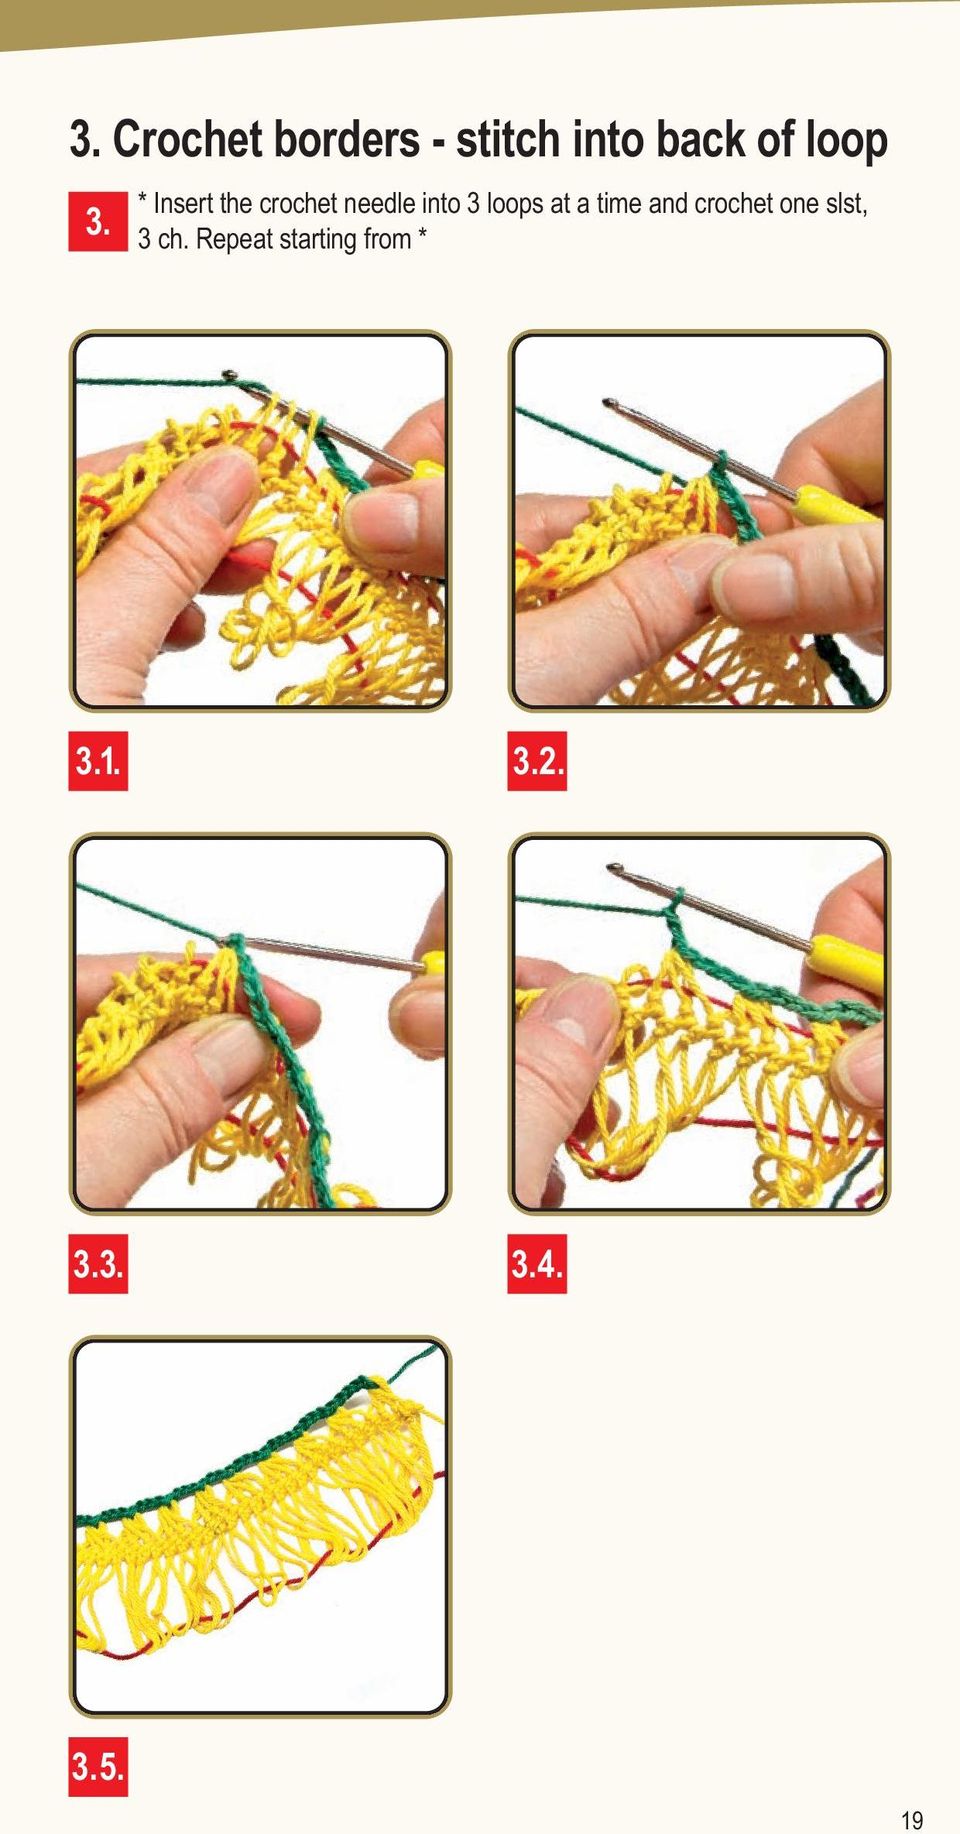 * Insert the crochet needle into 3 loops at